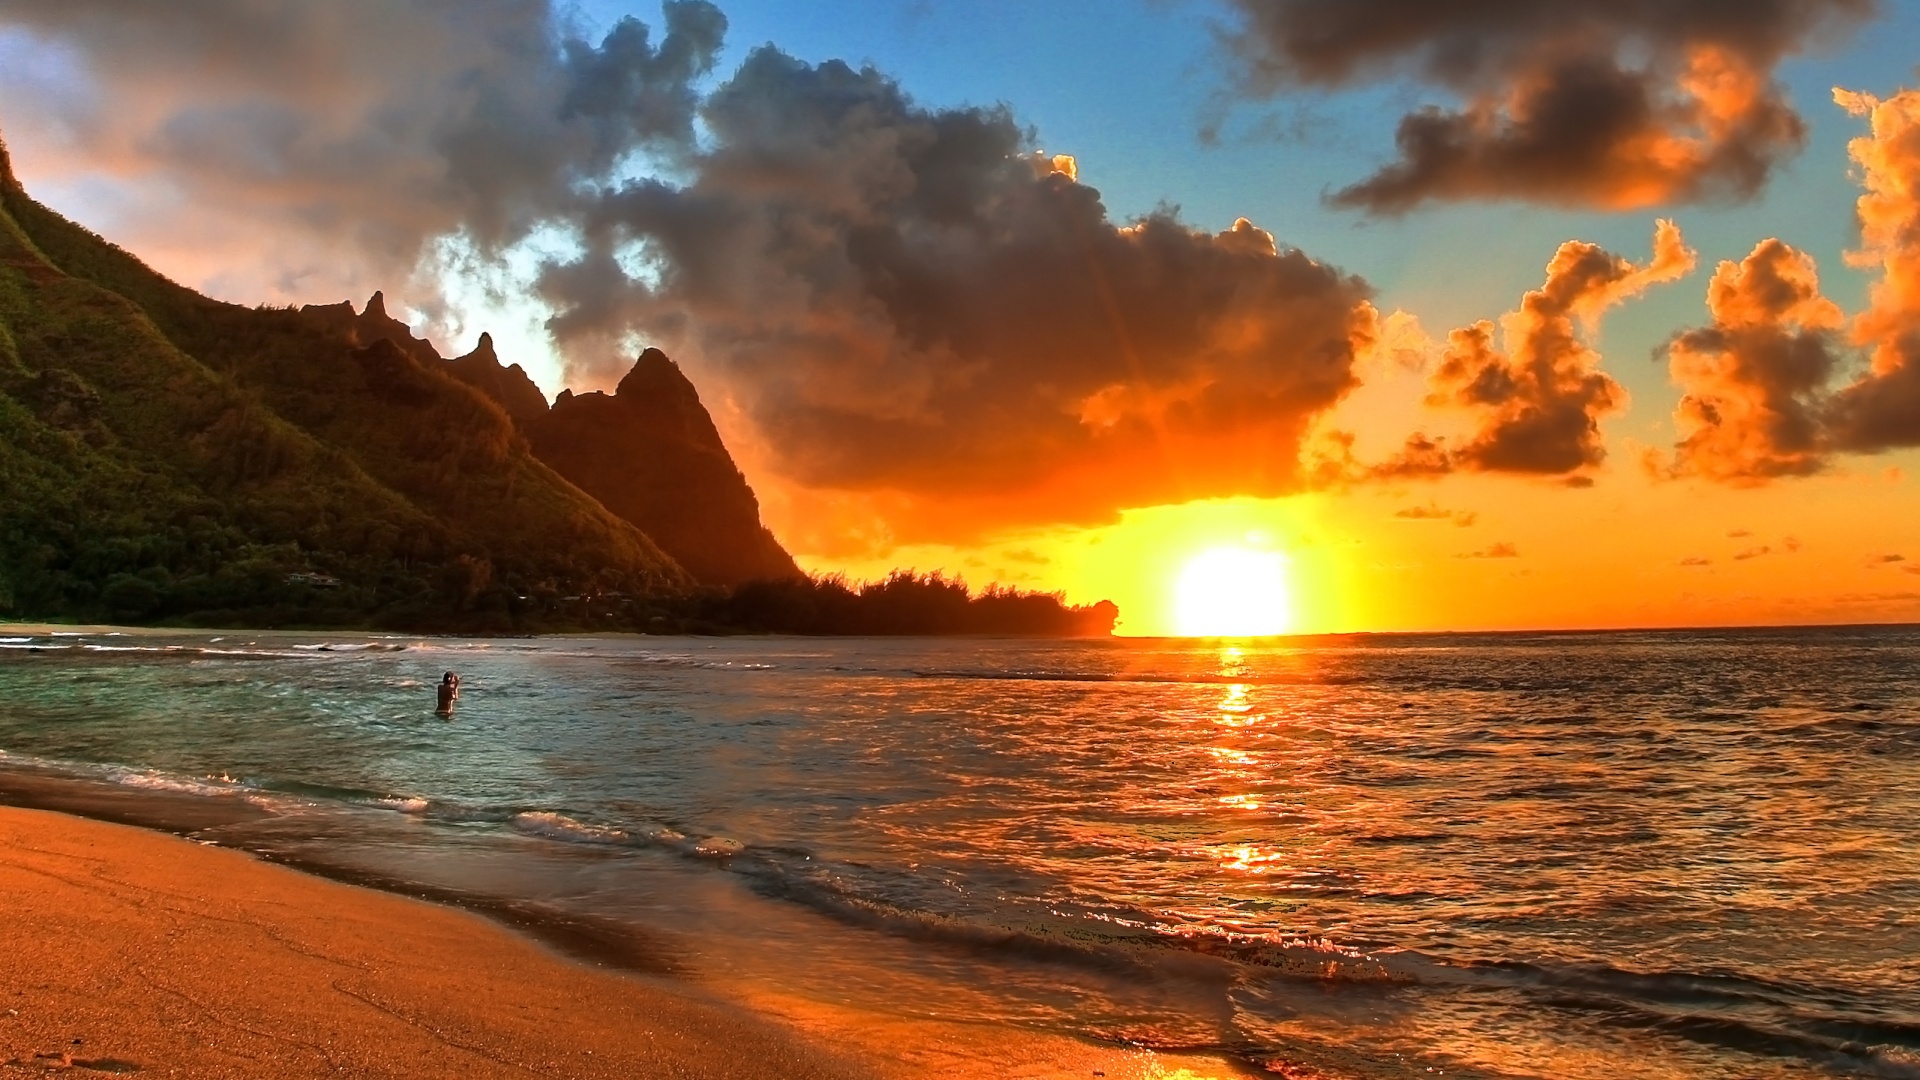 Beautiful Beaches At Sunset Wallpaper Background 1 HD Wallpapers